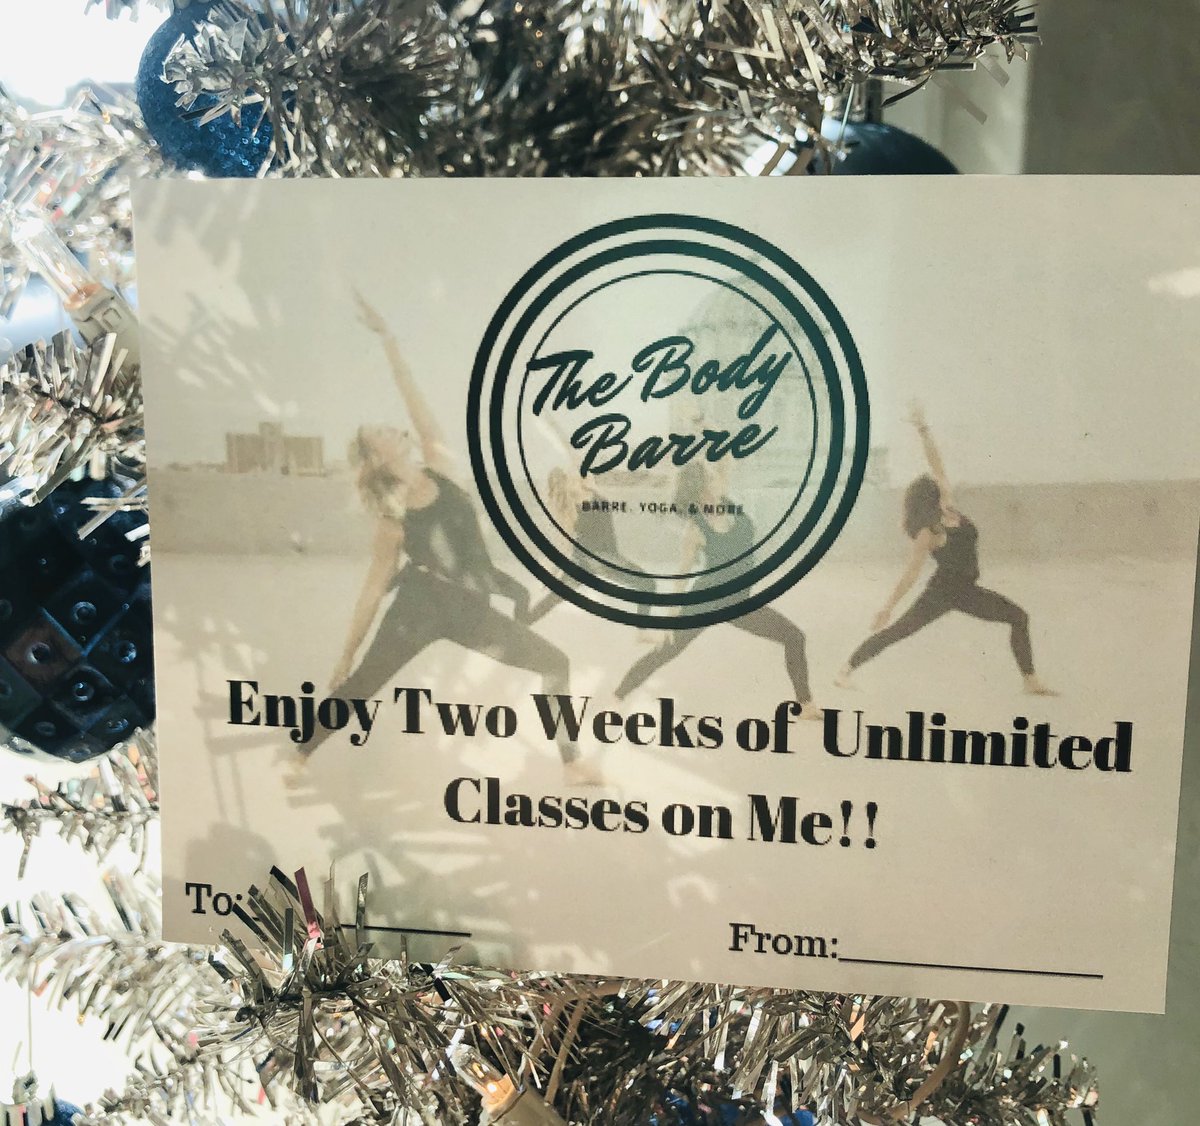 Give the gift of health!! This is the best gift you can give to friends and family! #edmondactive #edmondbarre #yoga #localyoga #giftofhealth #oklahoma